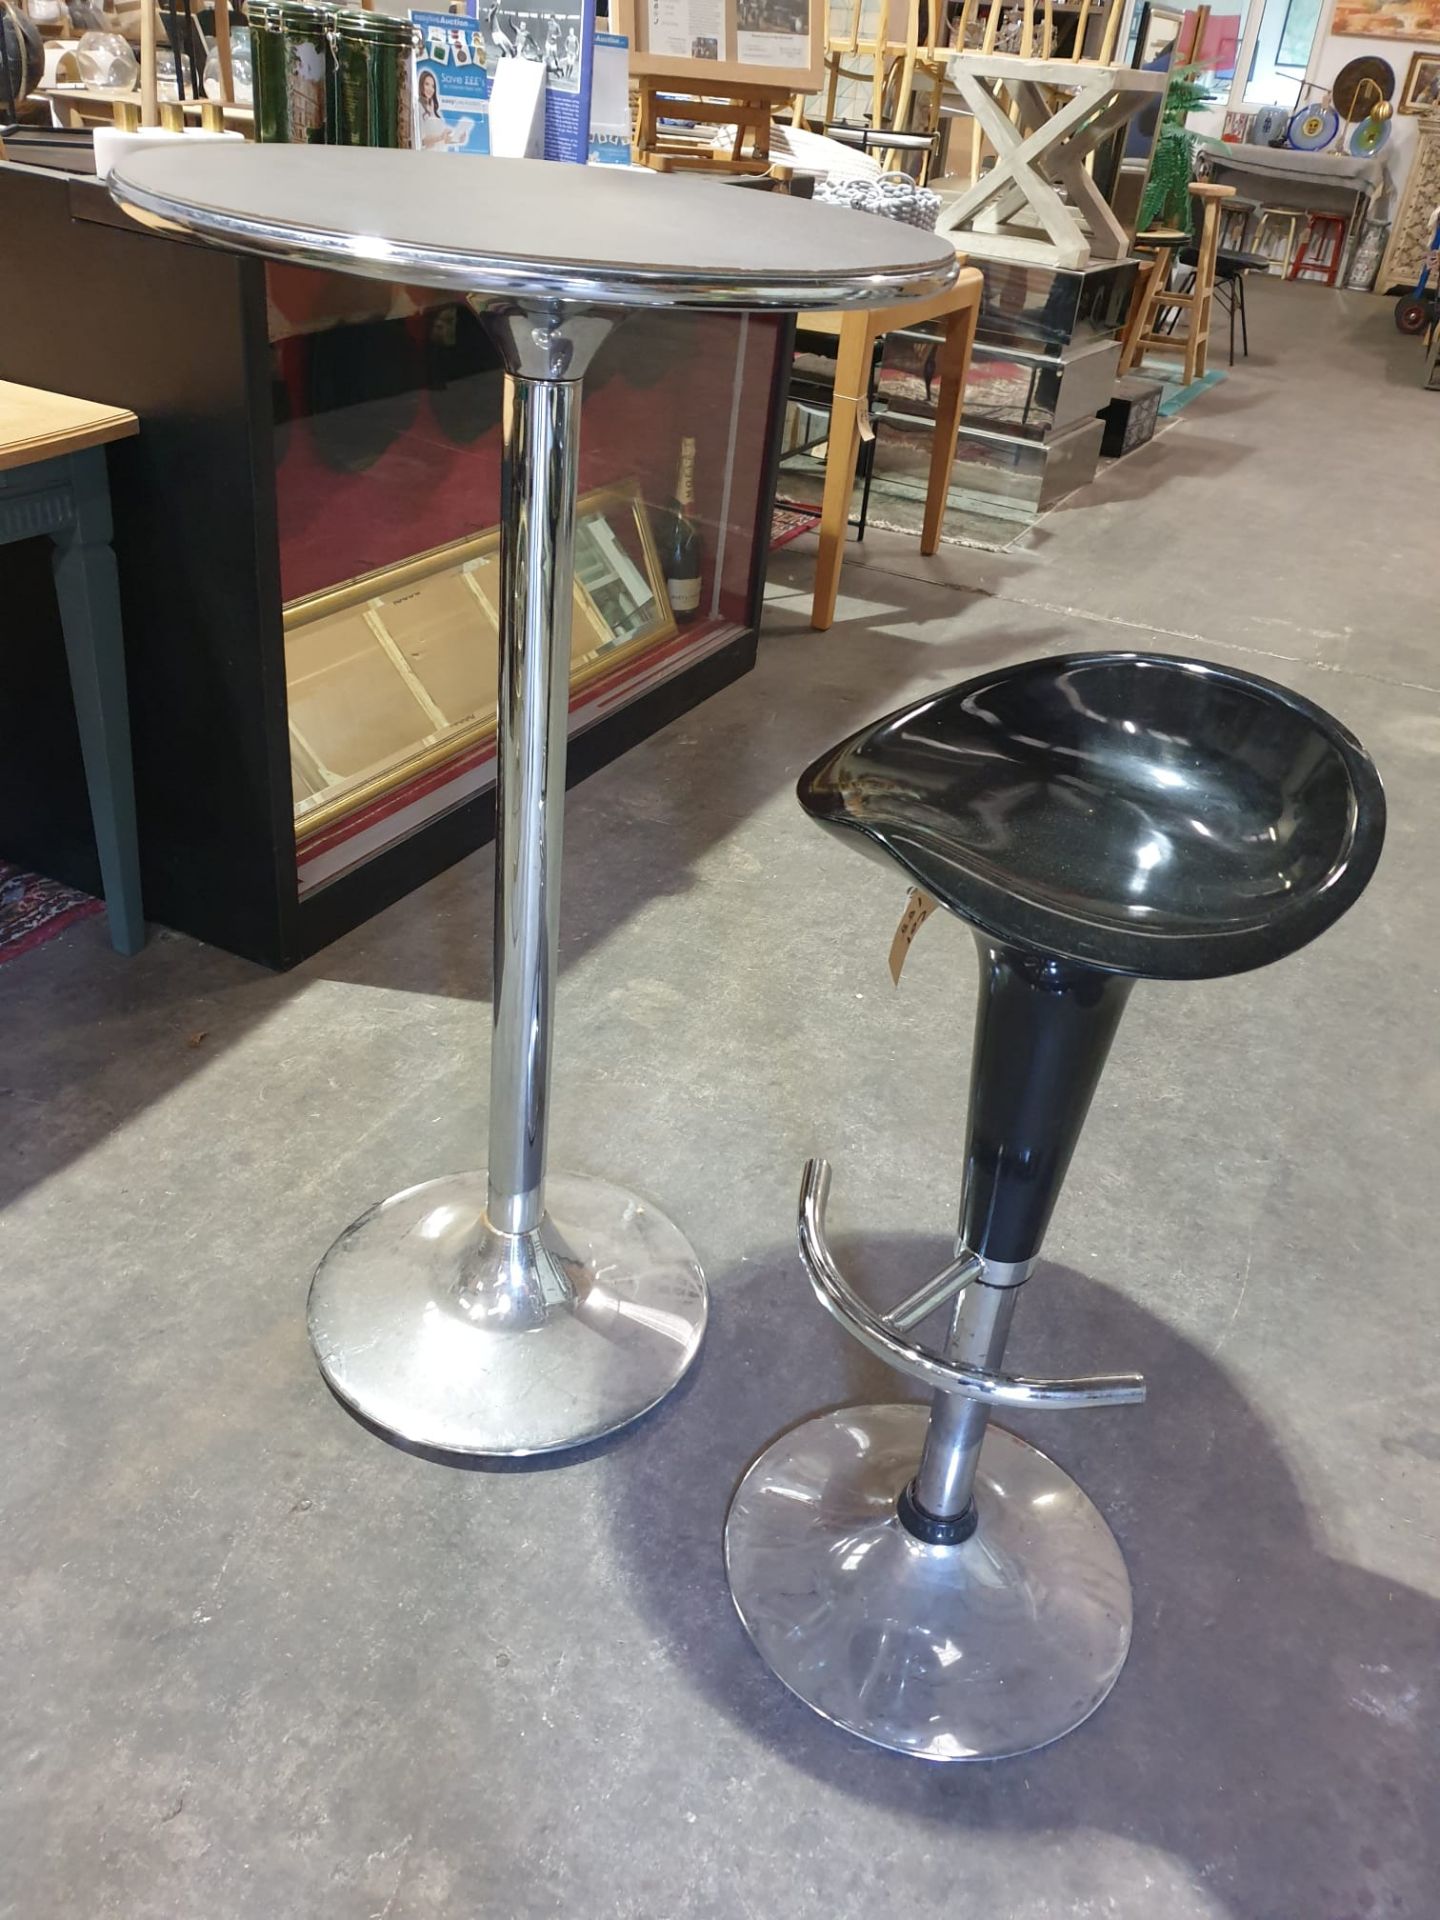 Poseur Table And Stool Circular Poseur Table With Round Chrome Base And Complete With A Modern - Bild 2 aus 2